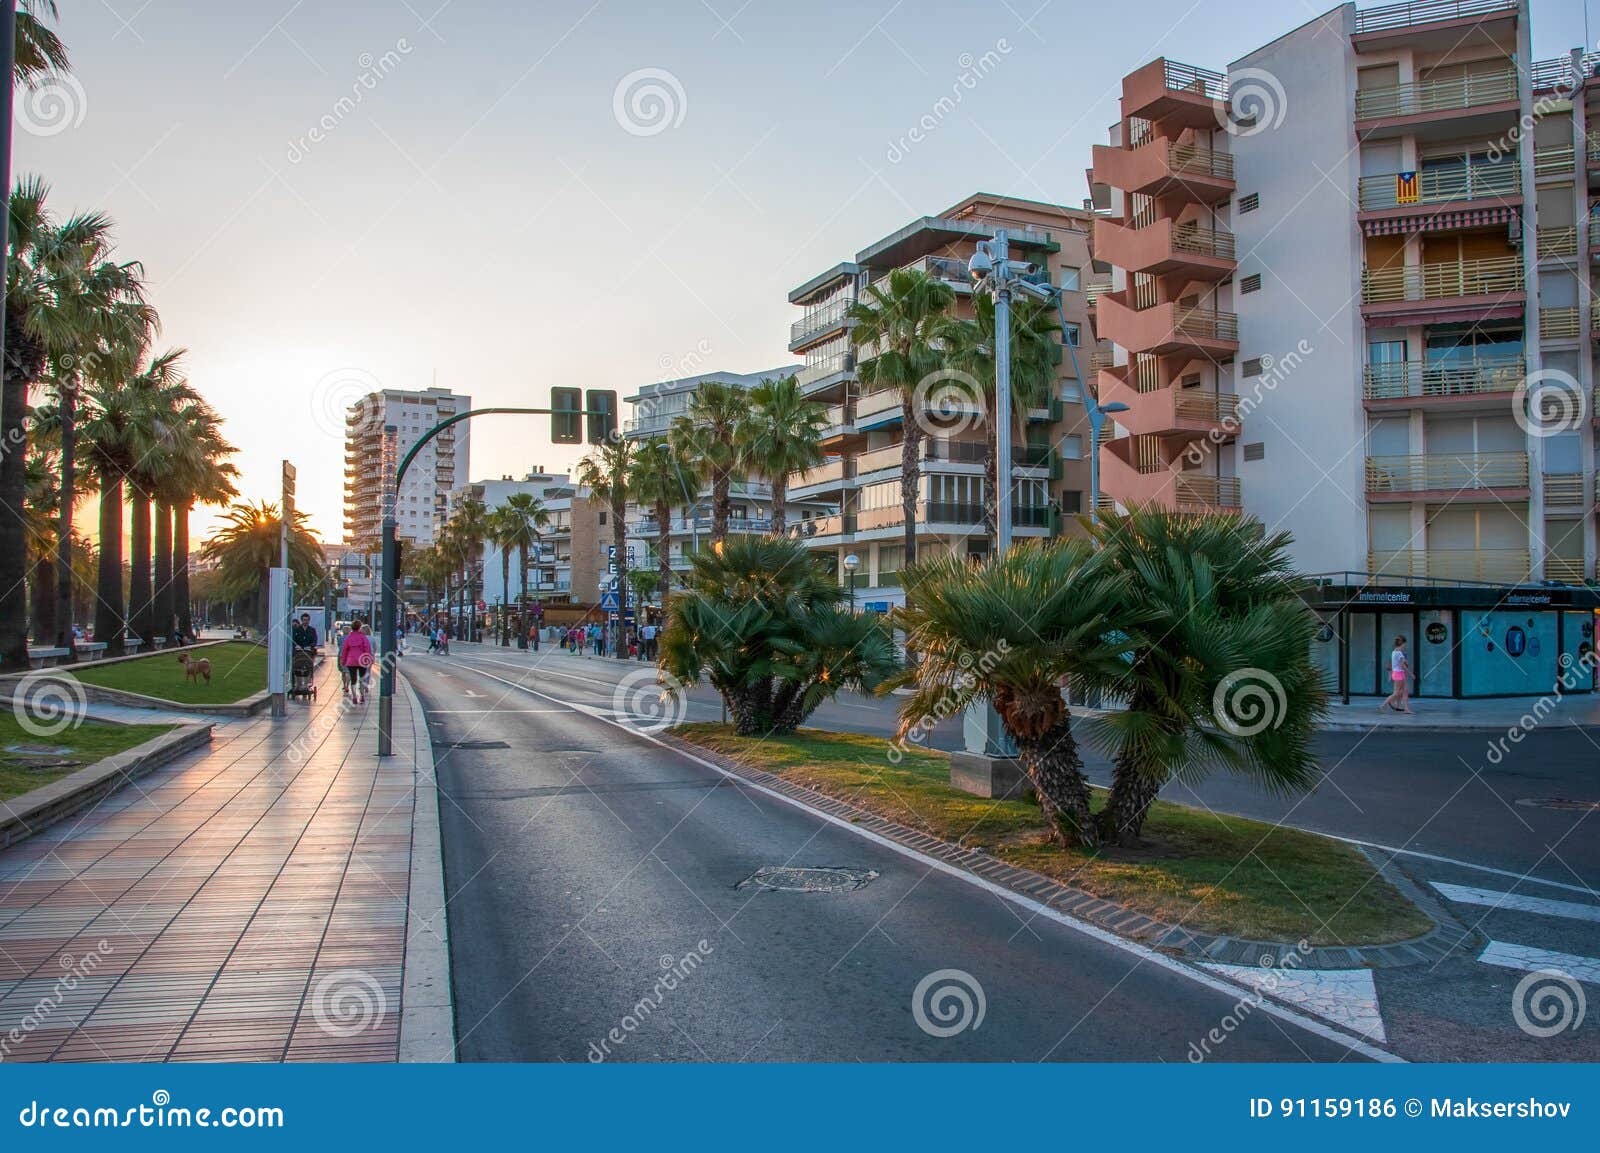 Street Along the Promenade in the City of Salou Editorial Photo - Image ...